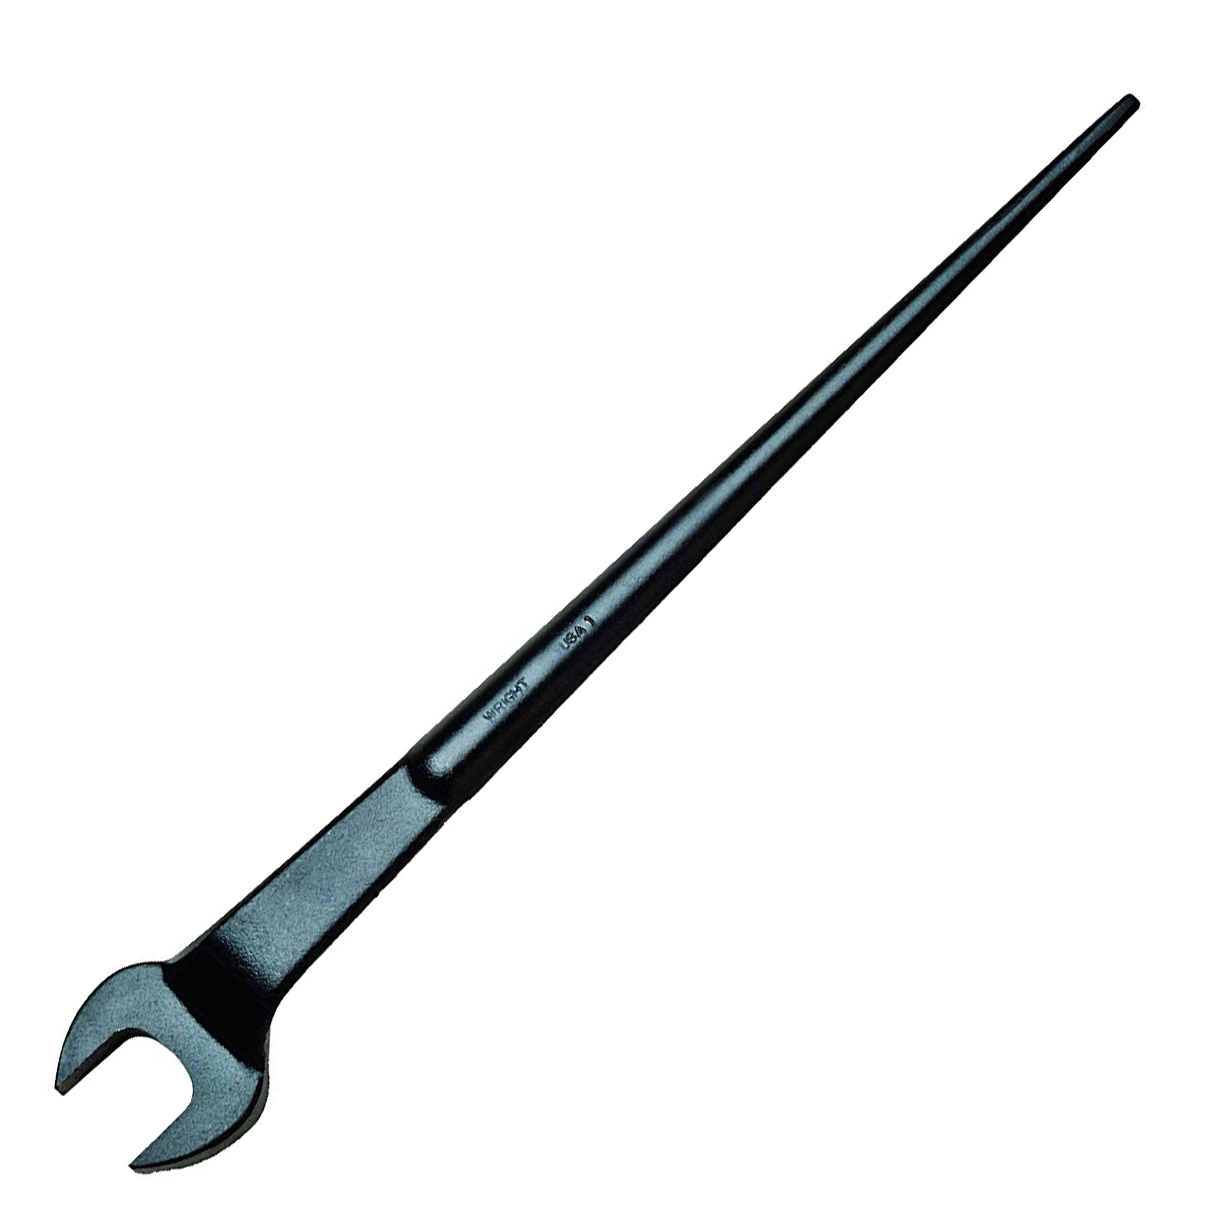 Wright 13/16" Structural Wrench Offset Head Black #1726 (1726WR)